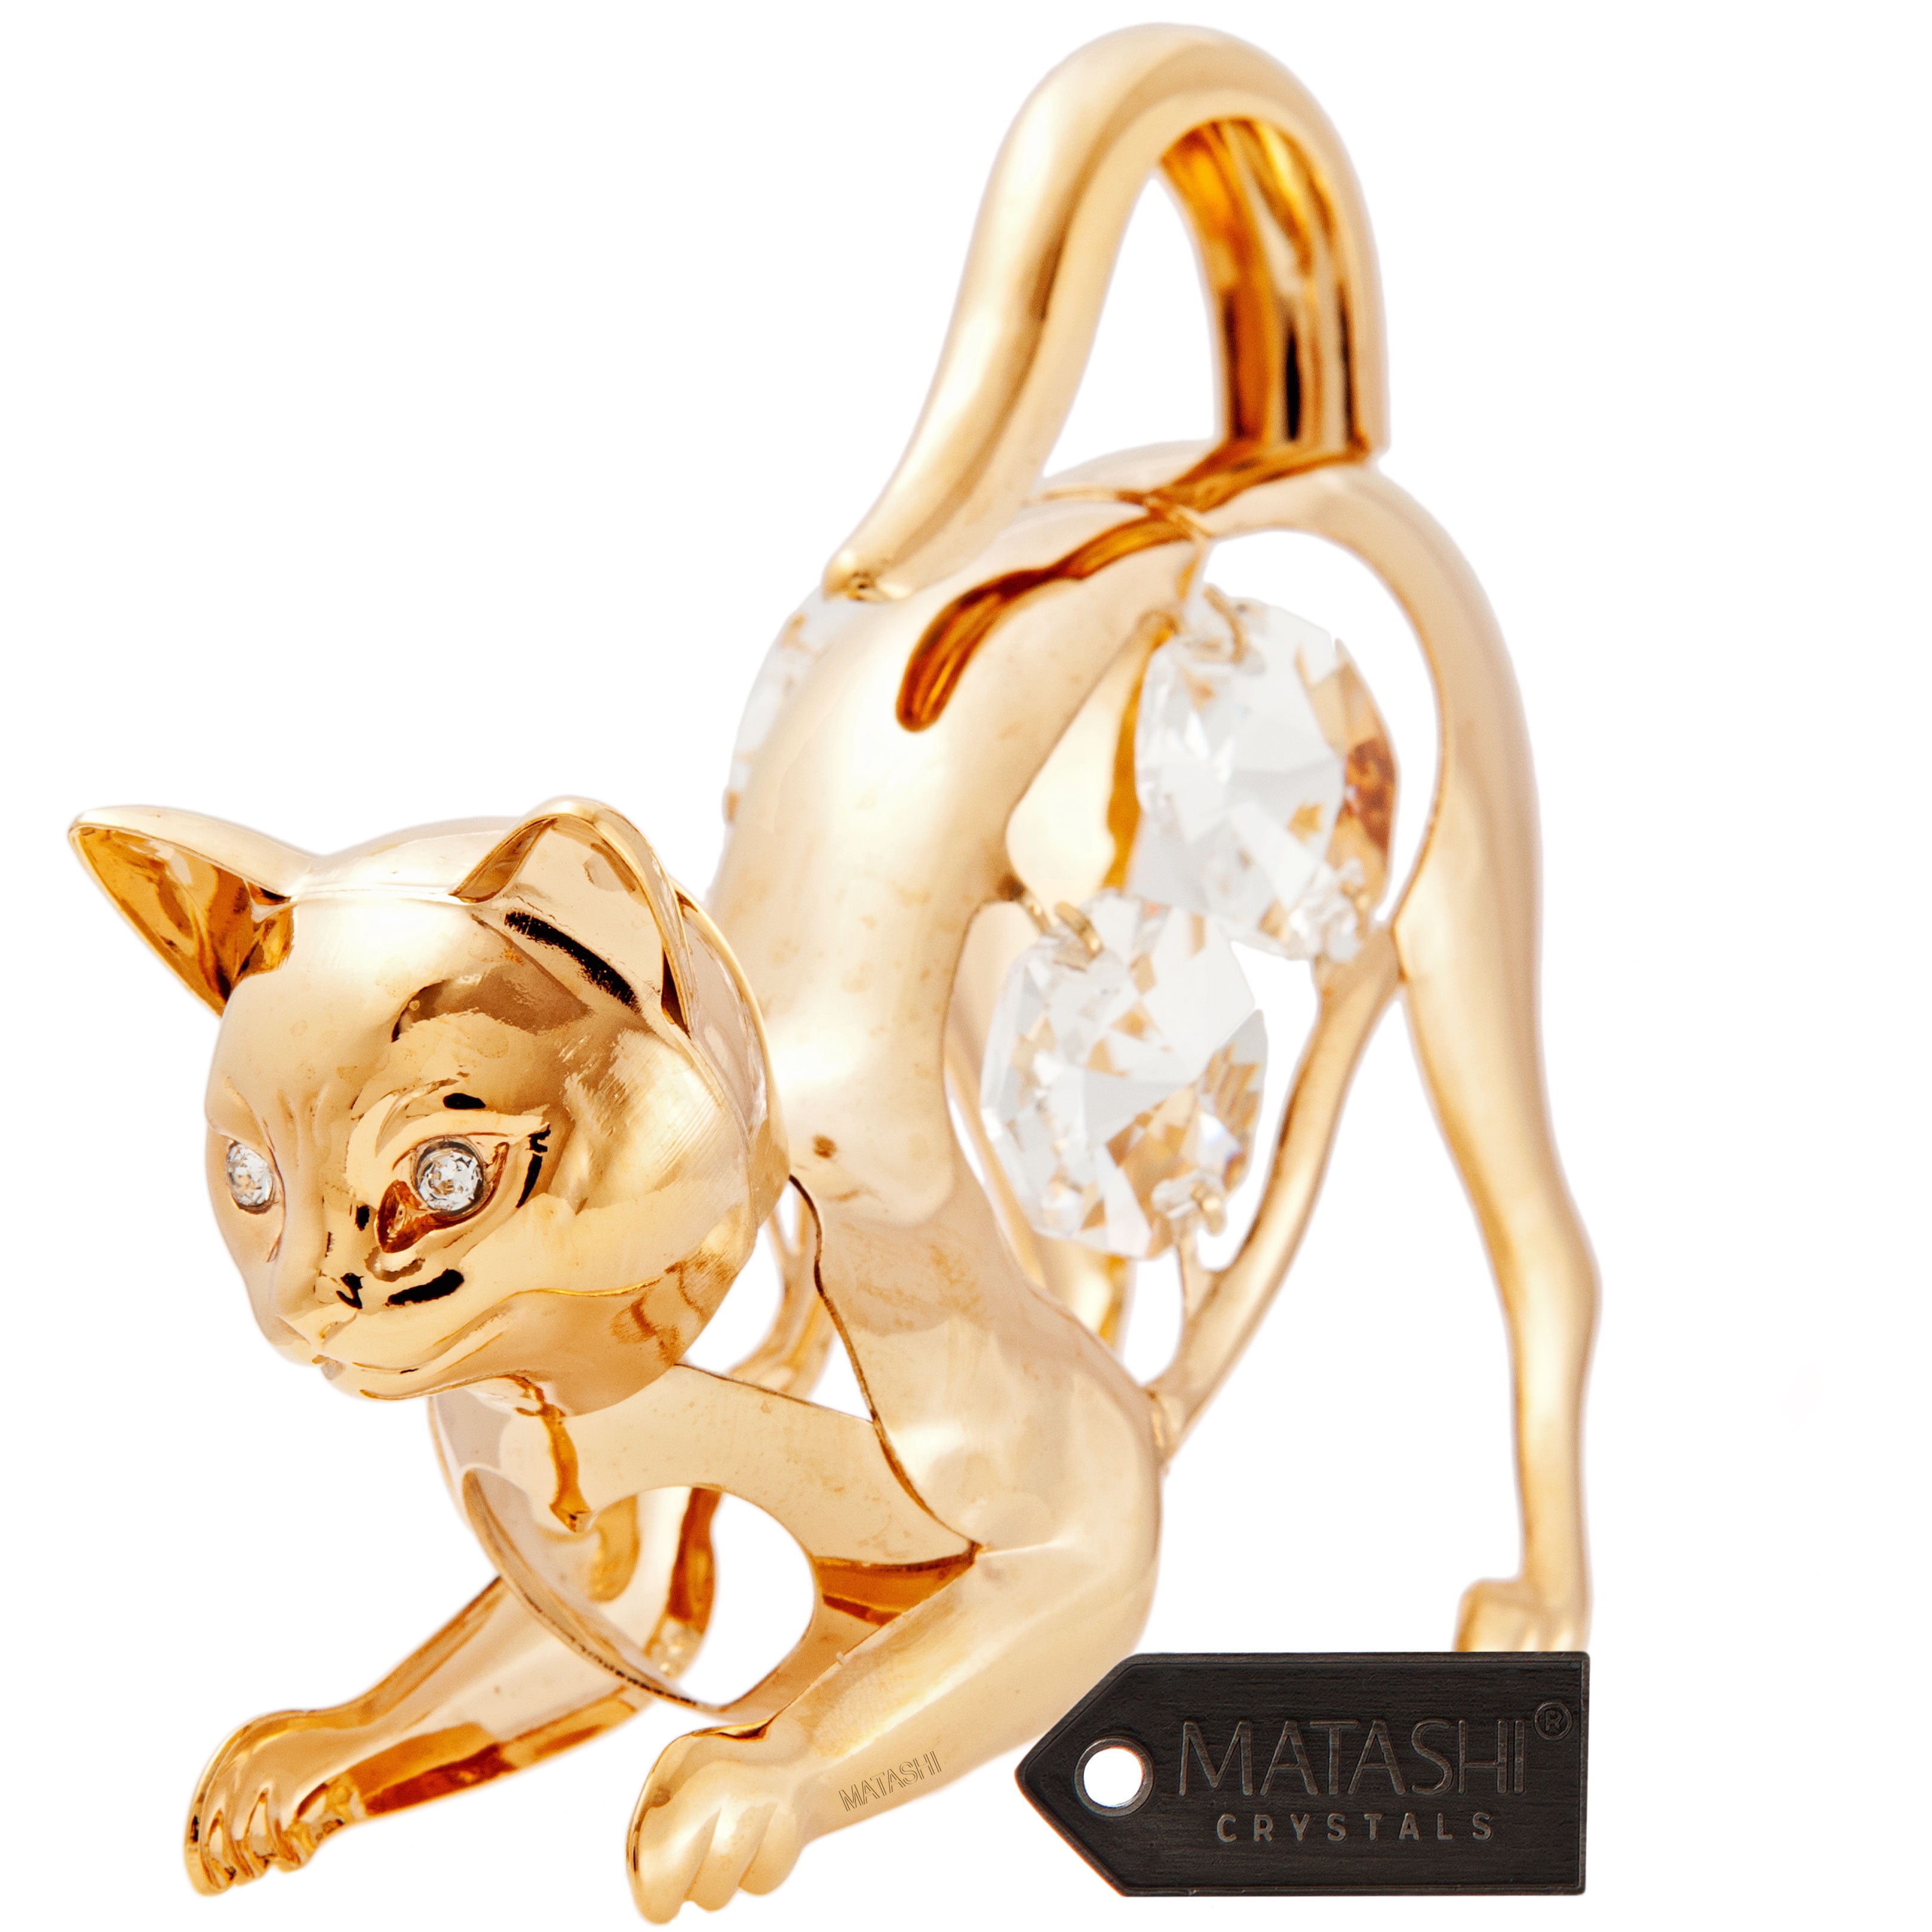 Matashi 24K Gold Plated Crystal Studded Cat on the Prowl Ornament Home Decor 